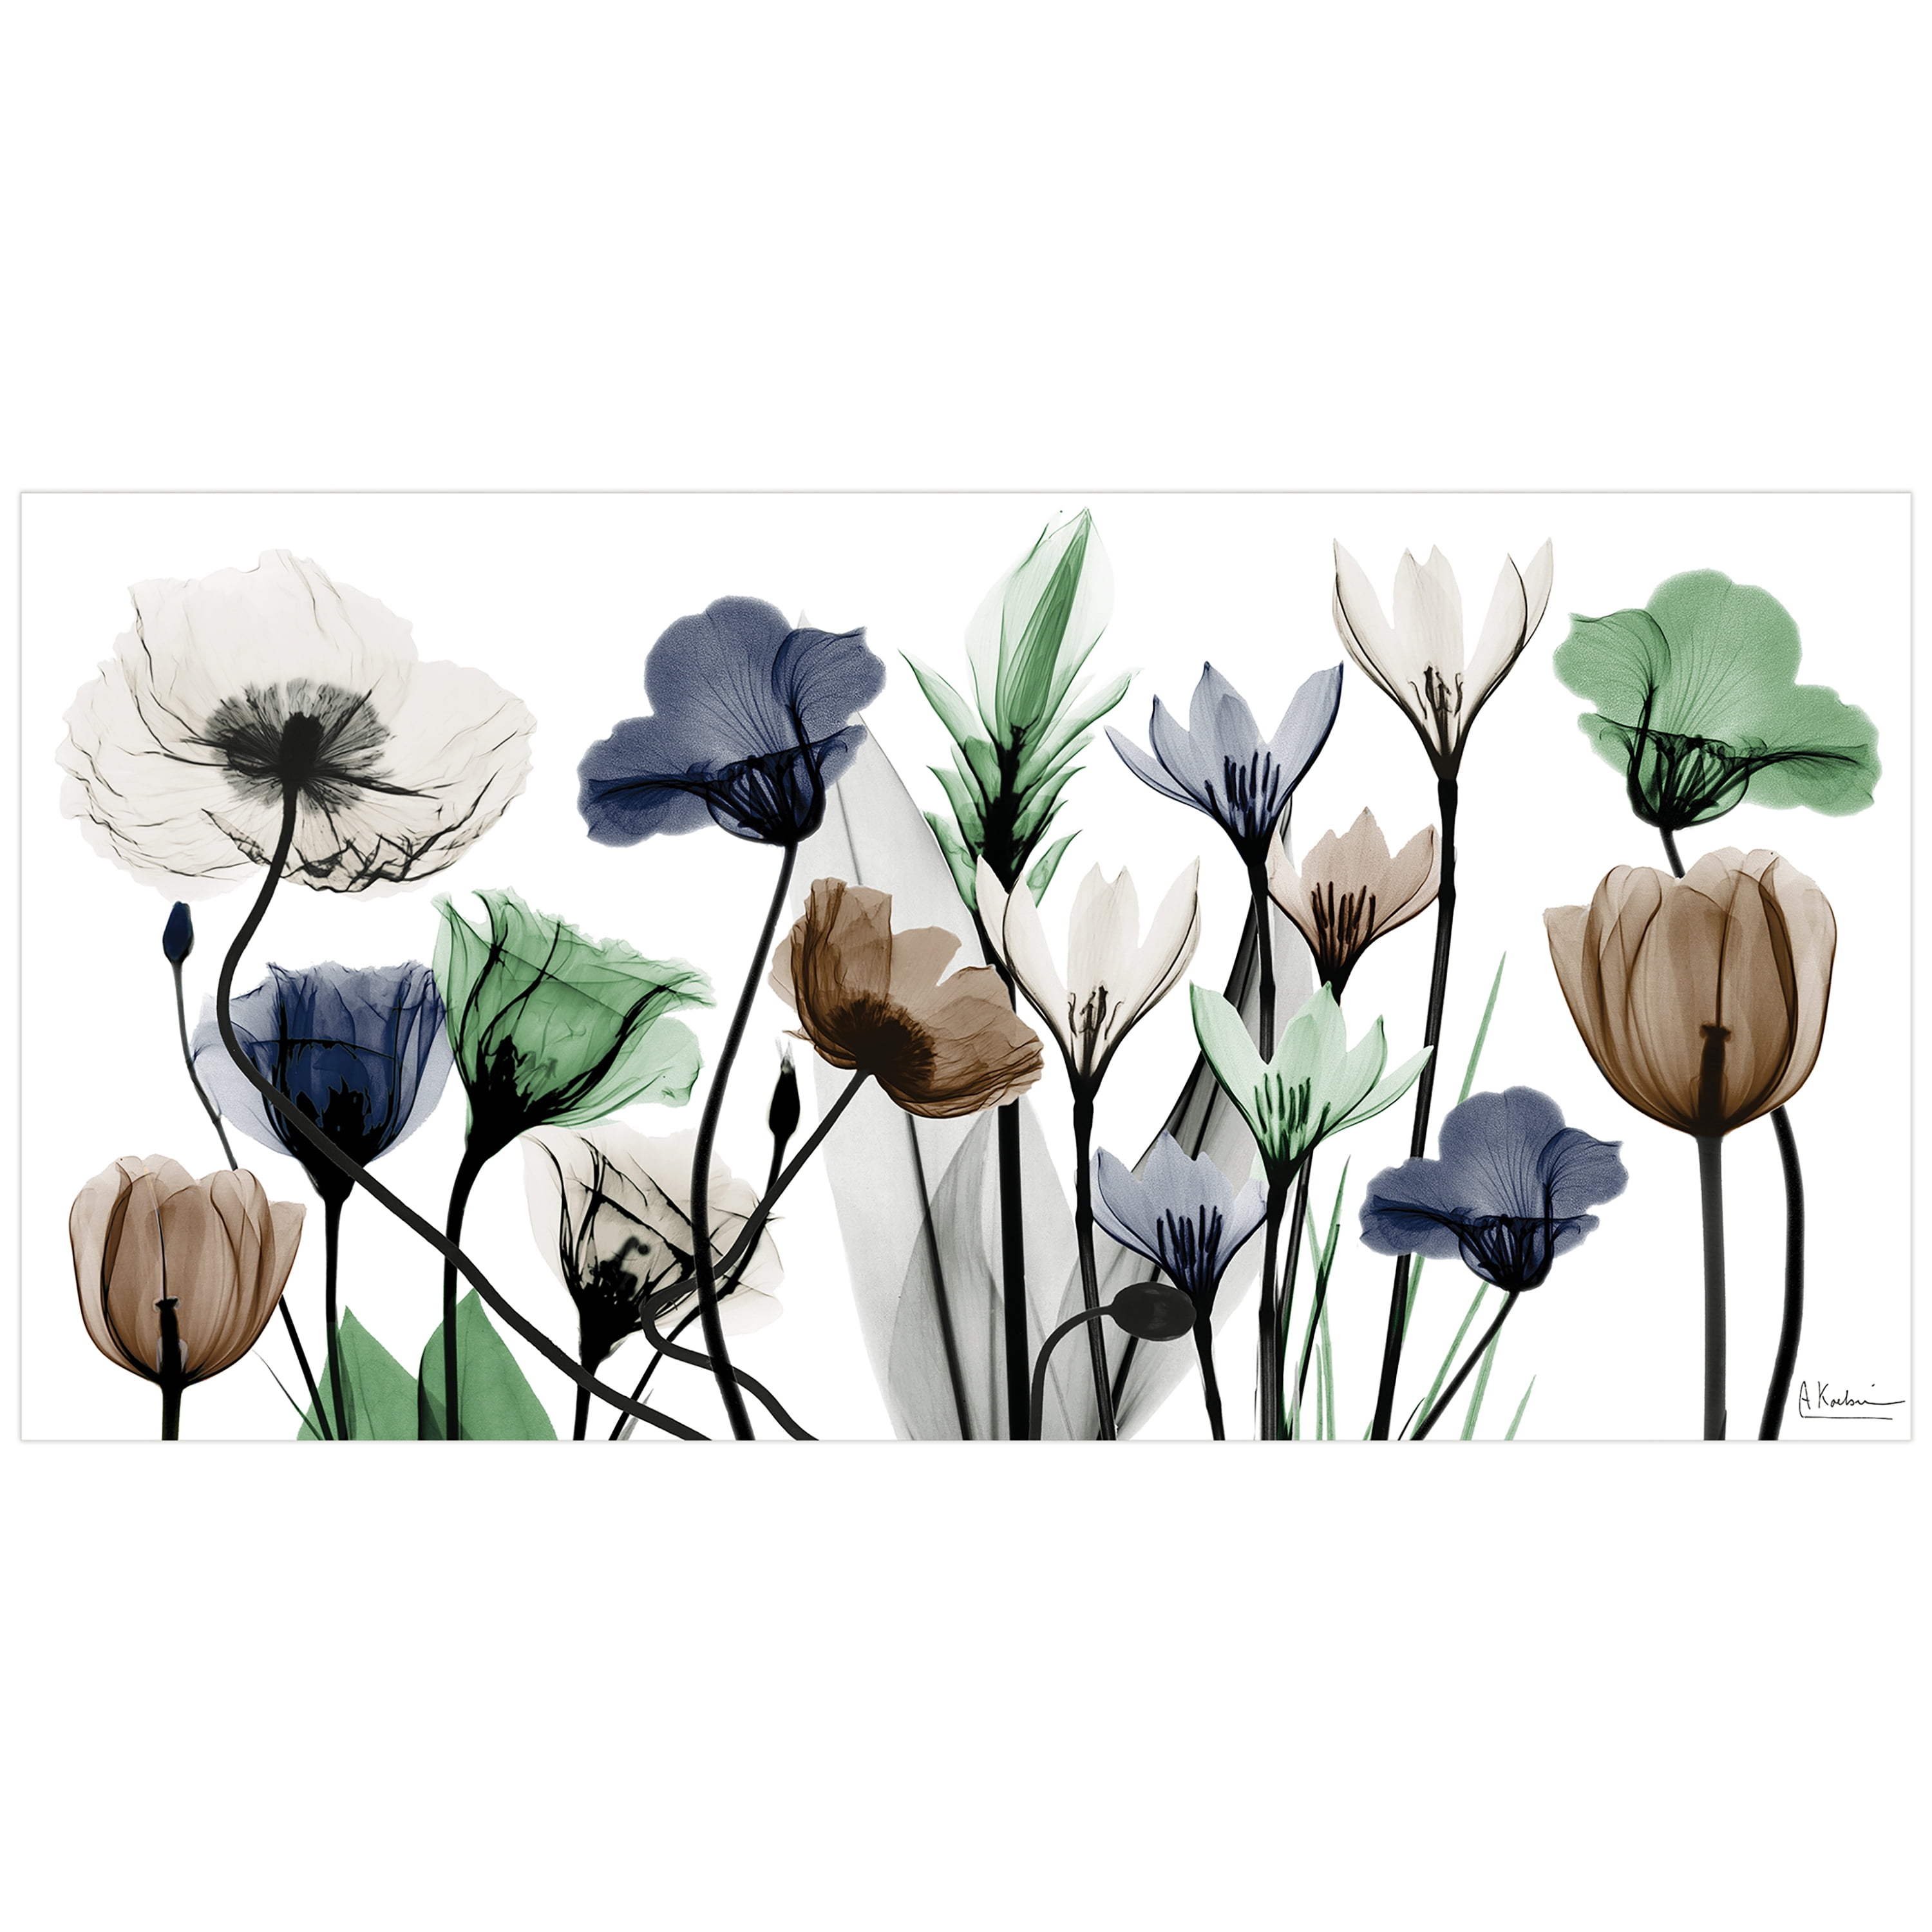 Empire Art Direct Floral Landscape Frameless Free Floating Tempered Glass Panel Graphic Flower Wall Art, 24" x 48" x 0.2", Ready to Hang -New